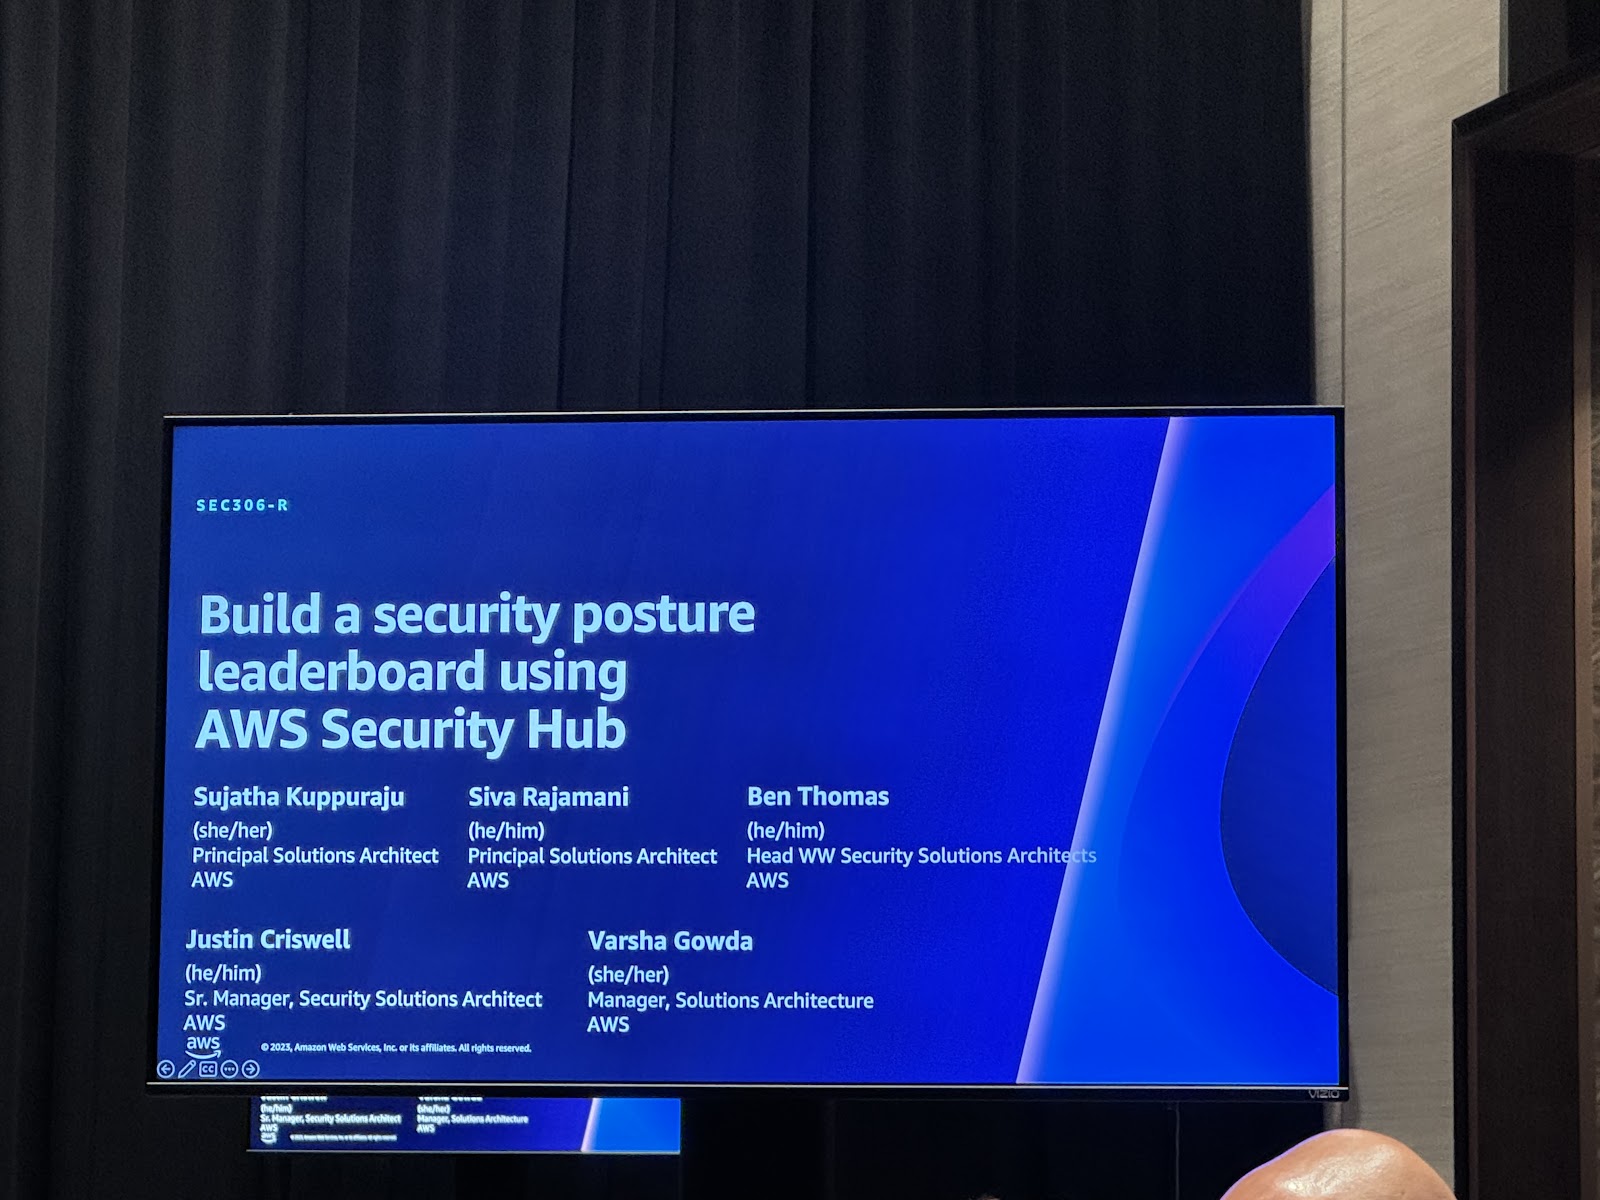 Build a security posture leaderboard using AWS Security Hub